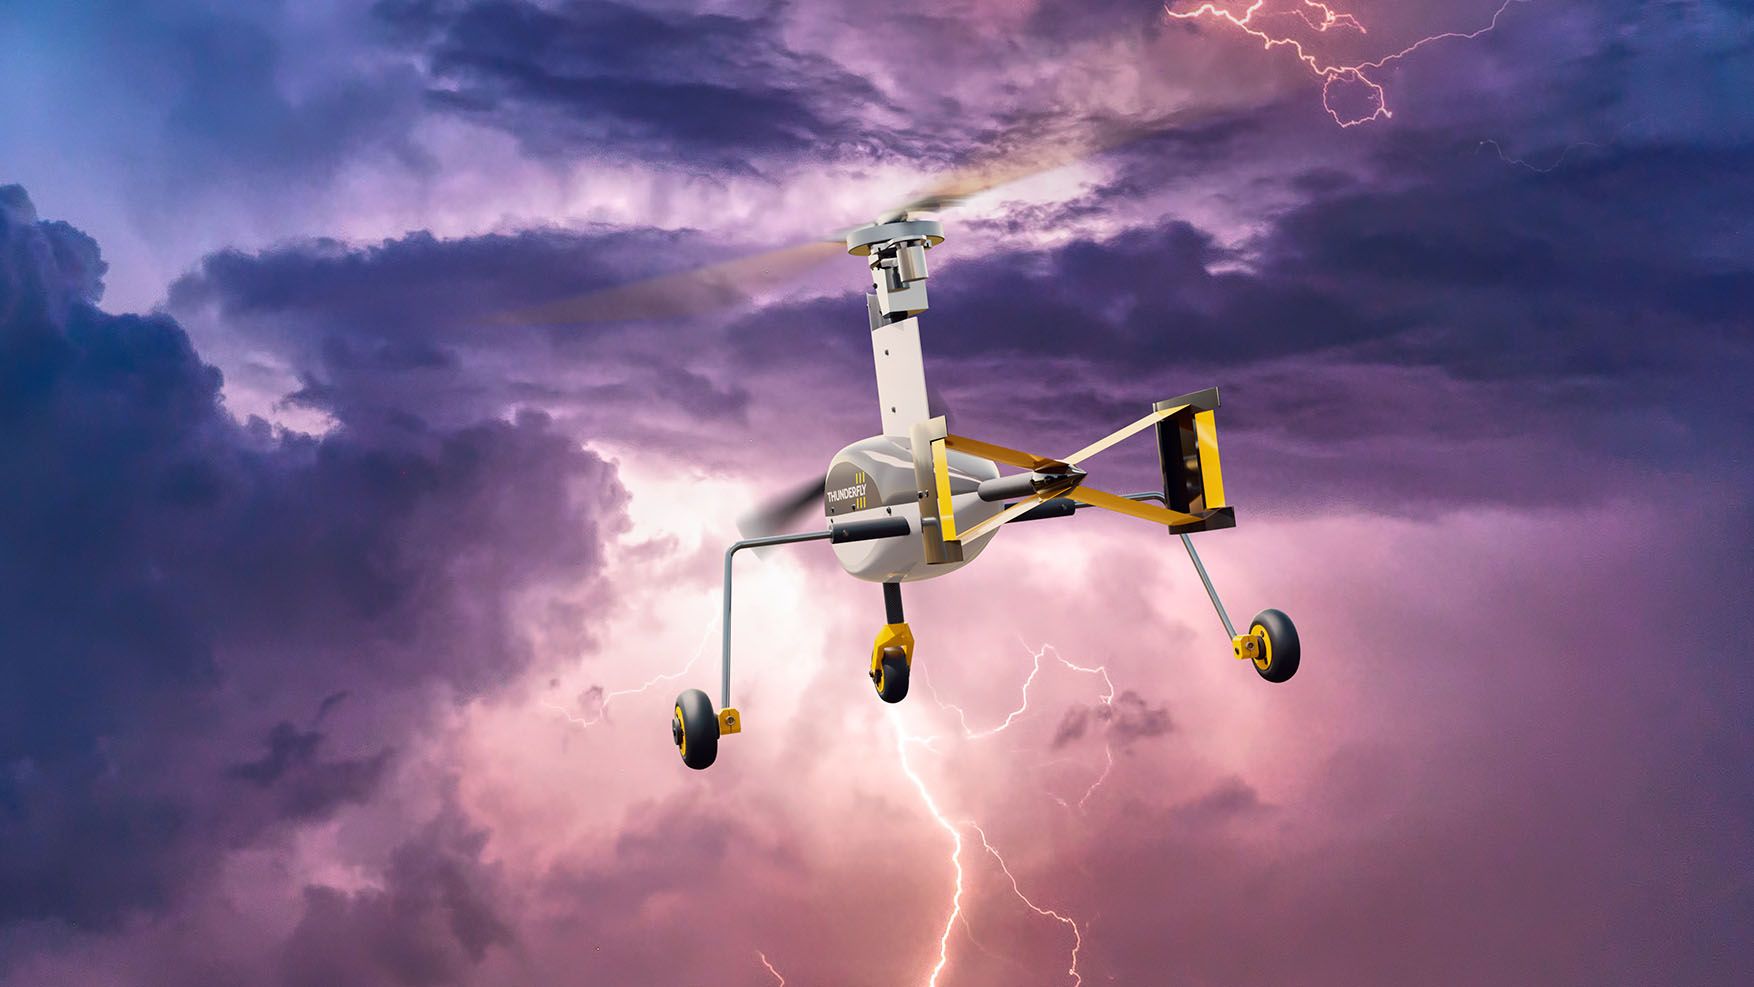 The TF-G1 is designed to withstand thunderstorms